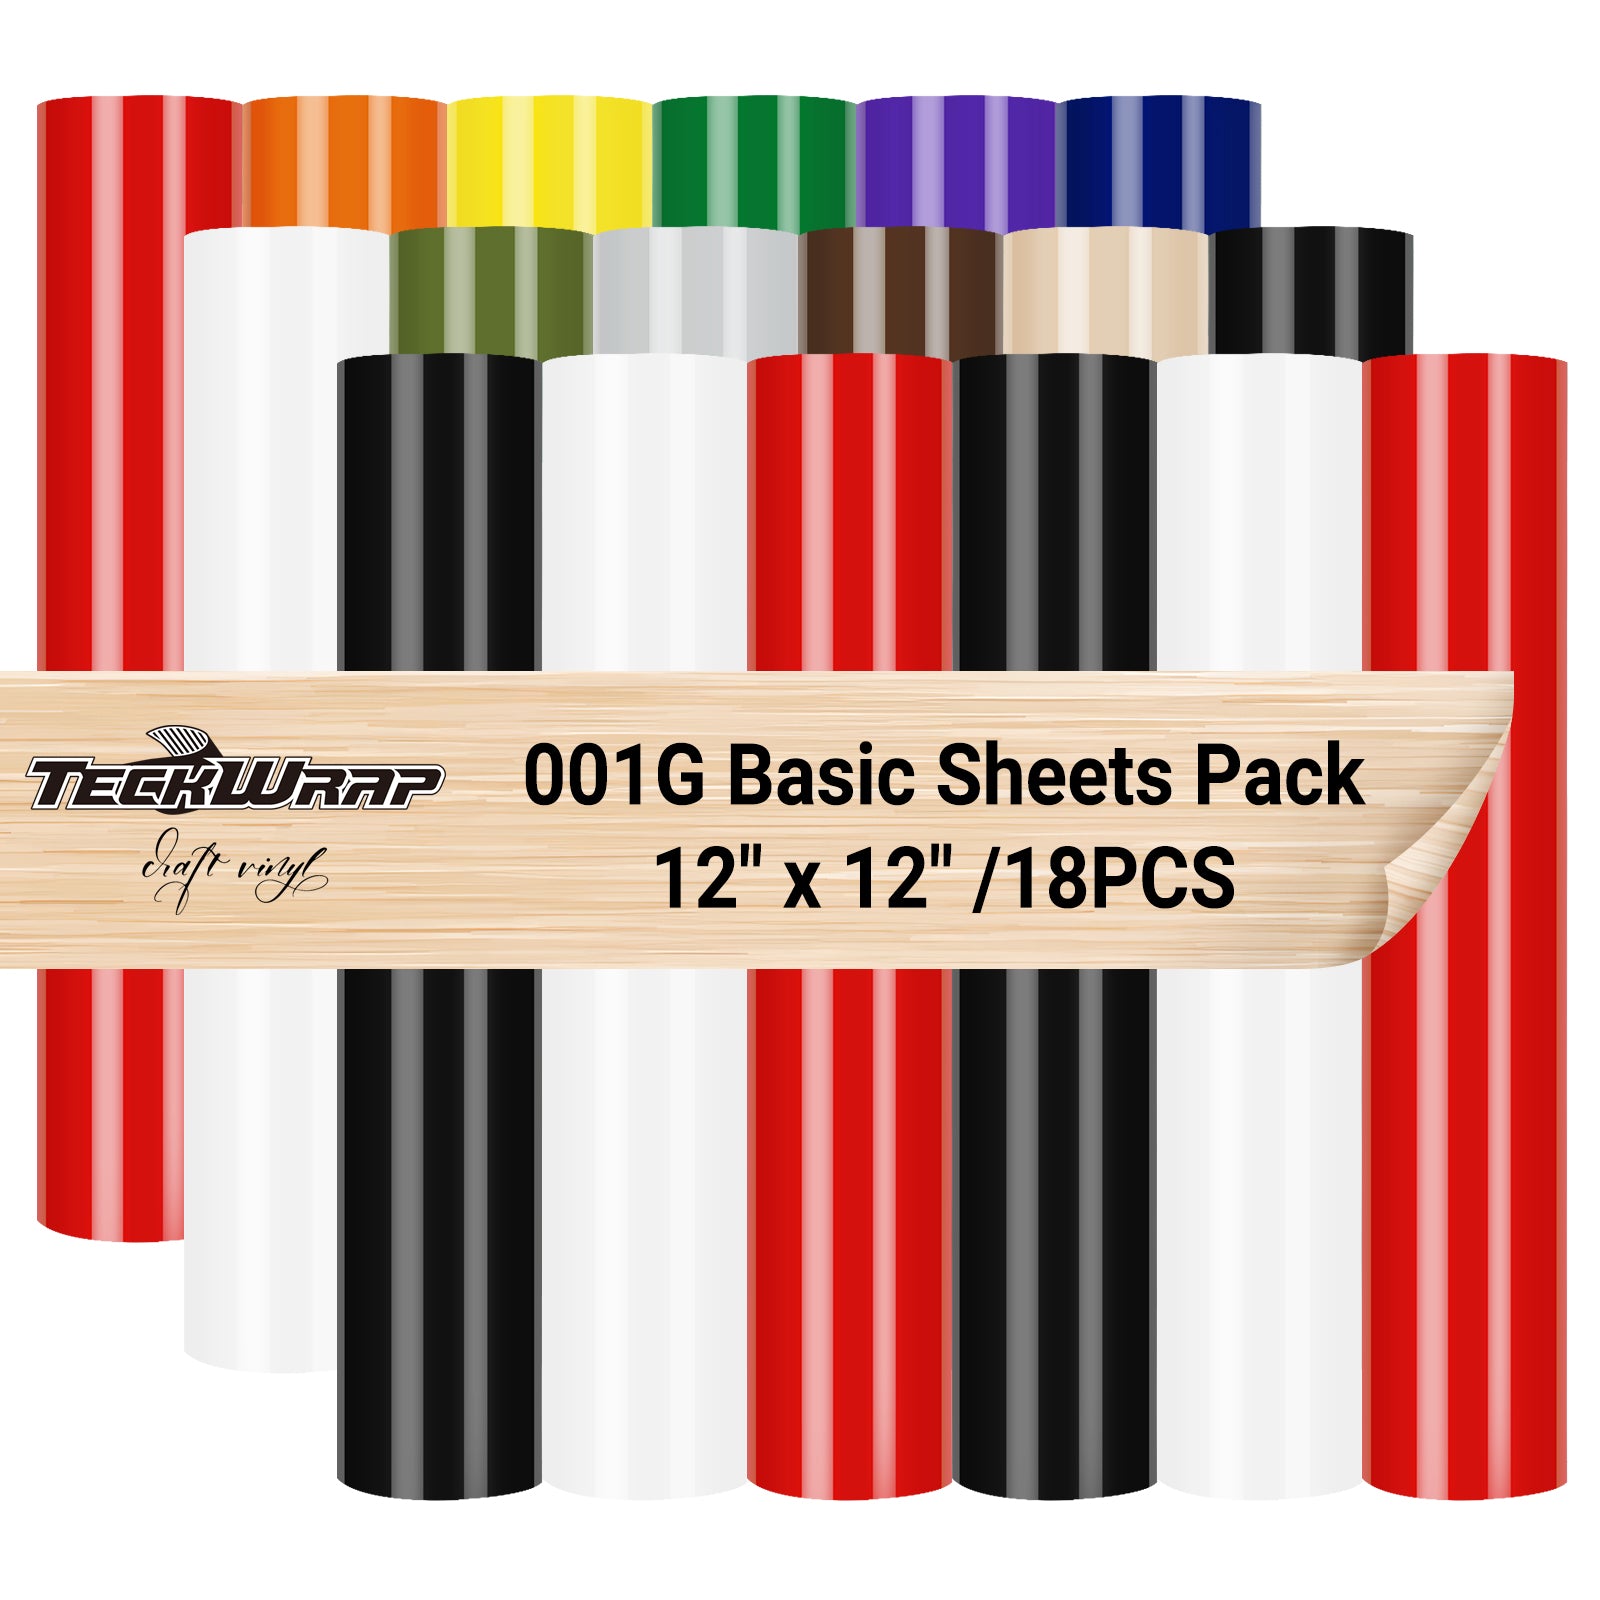 001G Series Basic Color Sheets Pack